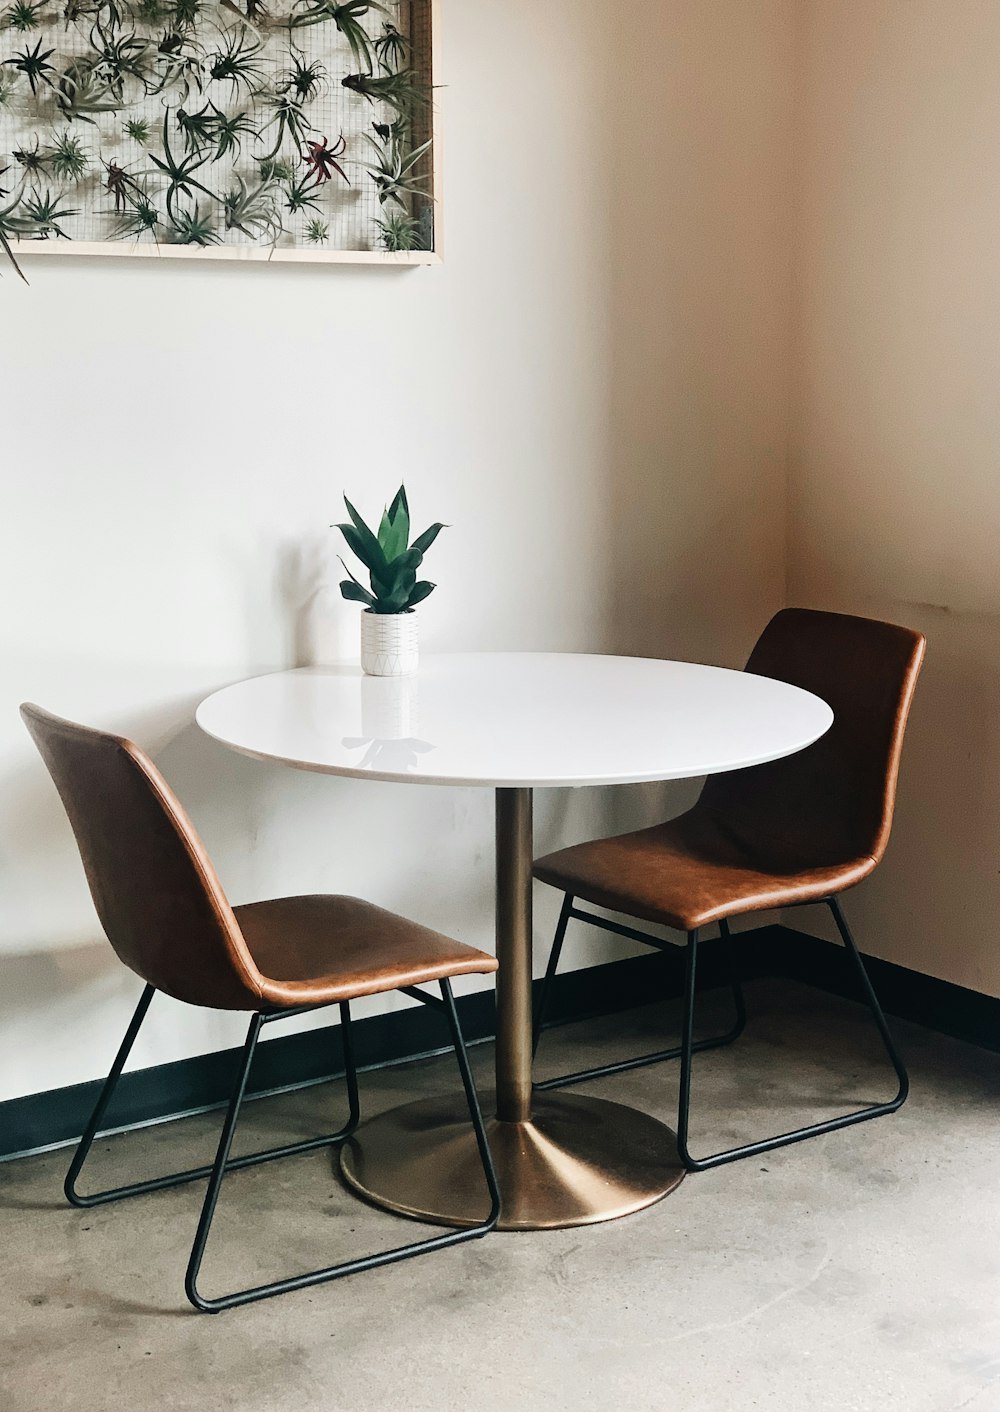 Cafe Table Pictures | Download Free Images on Unsplash